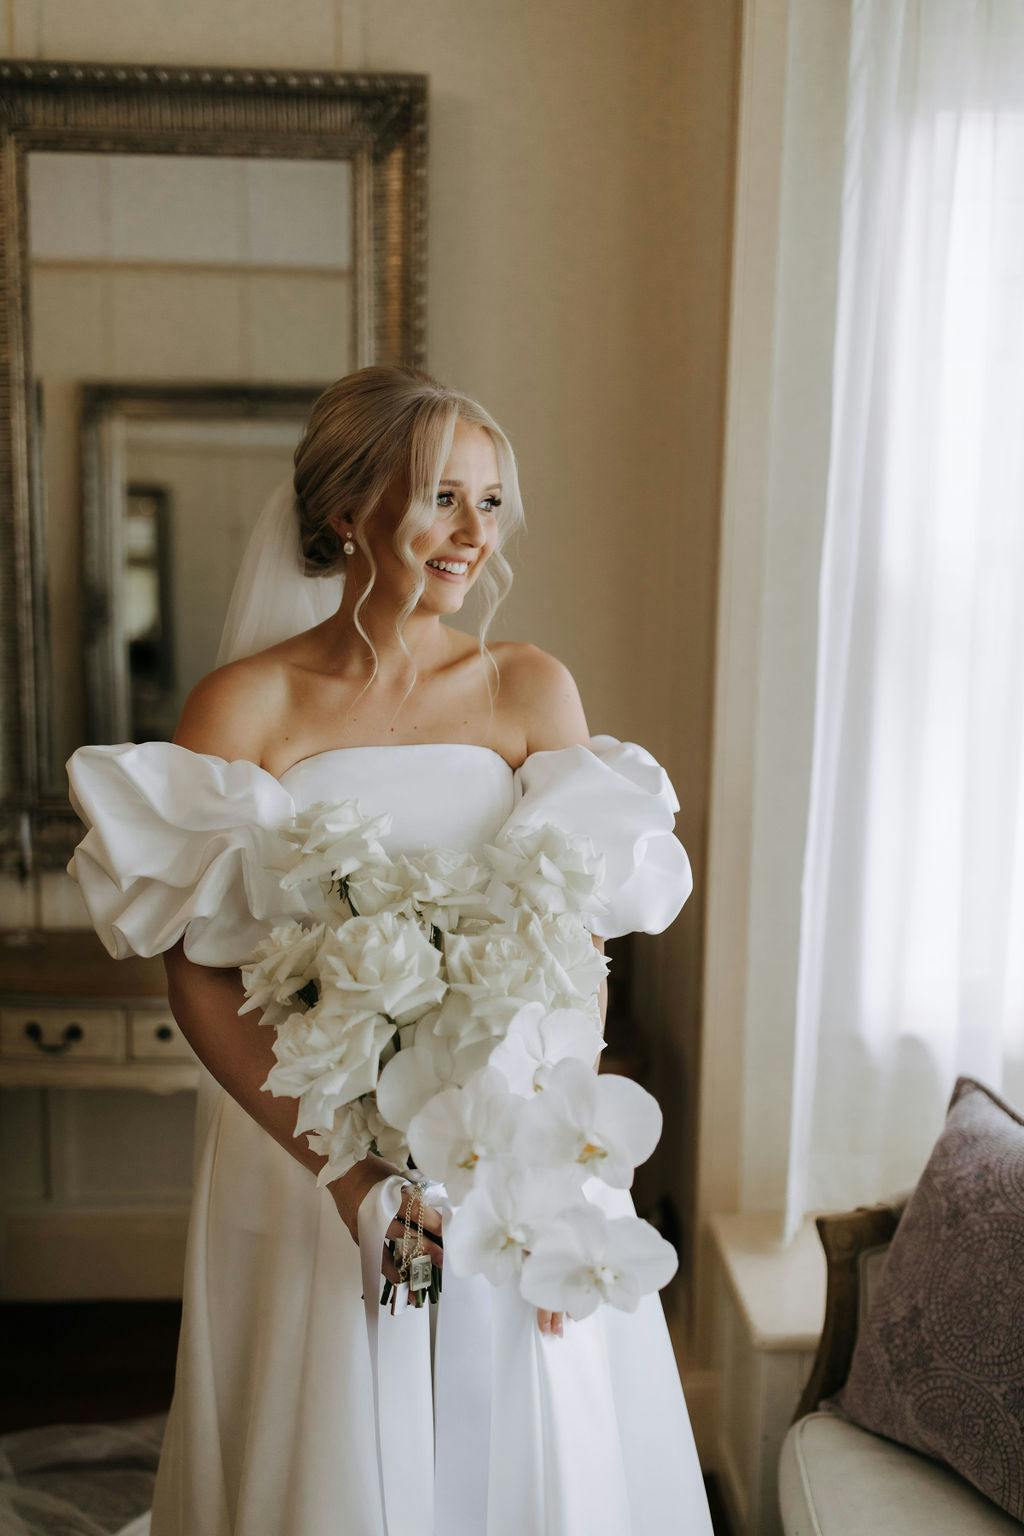 A bride with blonde hair stands indoors by a window with sheer curtains. She wears an off-the-shoulder white wedding dress with puffy sleeves and holds a large bouquet of white flowers, smiling and looking toward her left. A mirror and a small desk are in the background.